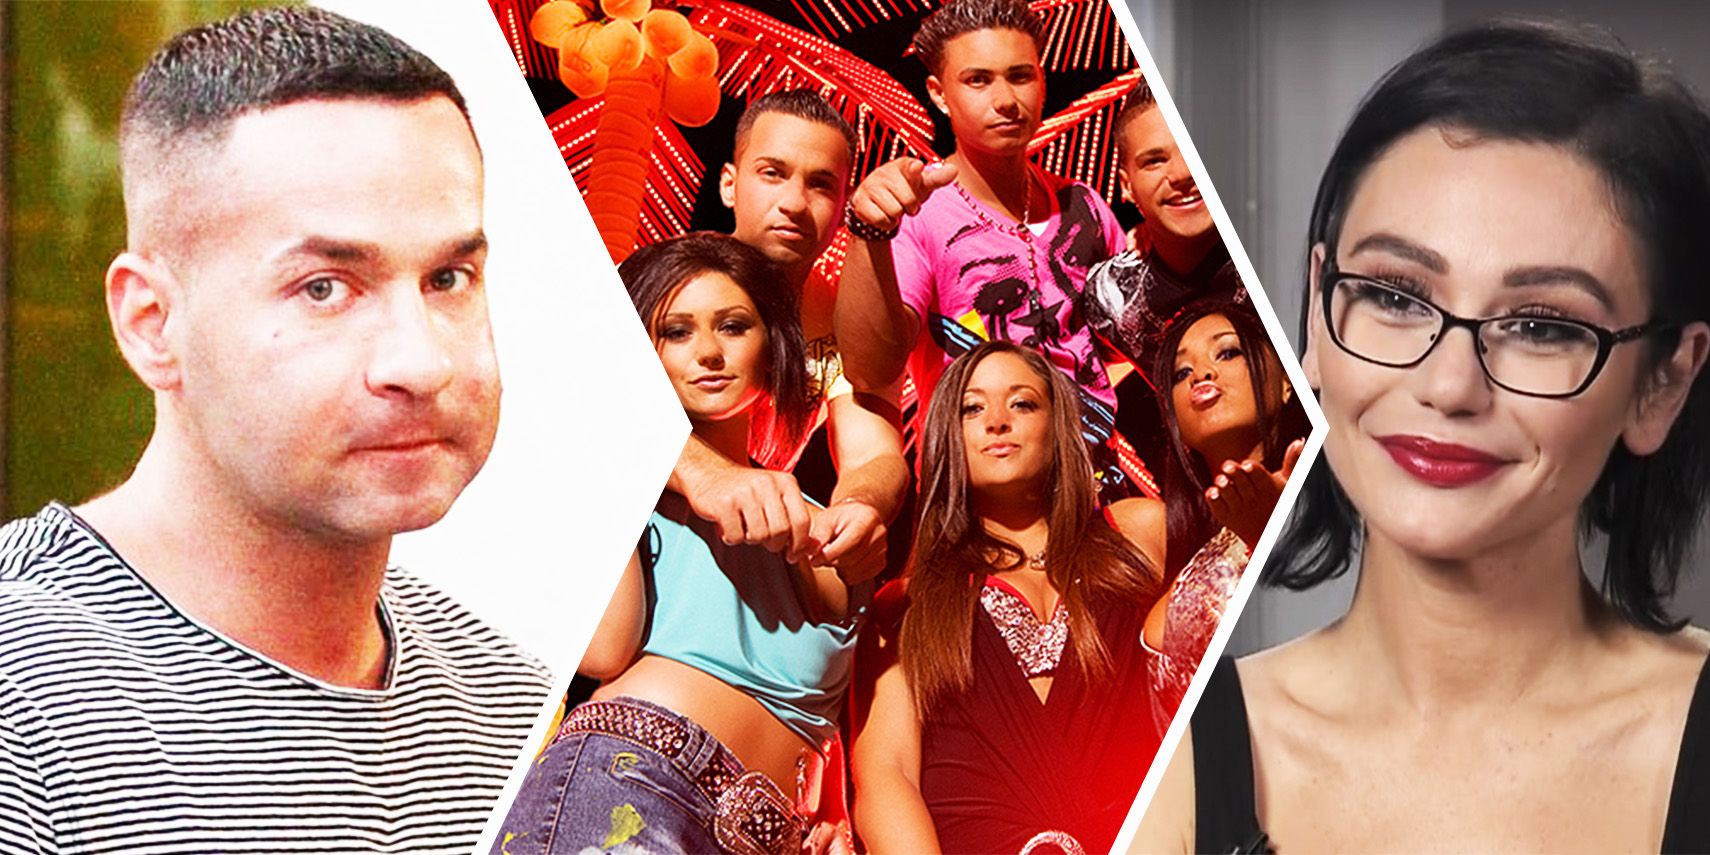 Jersey Shore First Look: The Situation and Snooki's Smushing